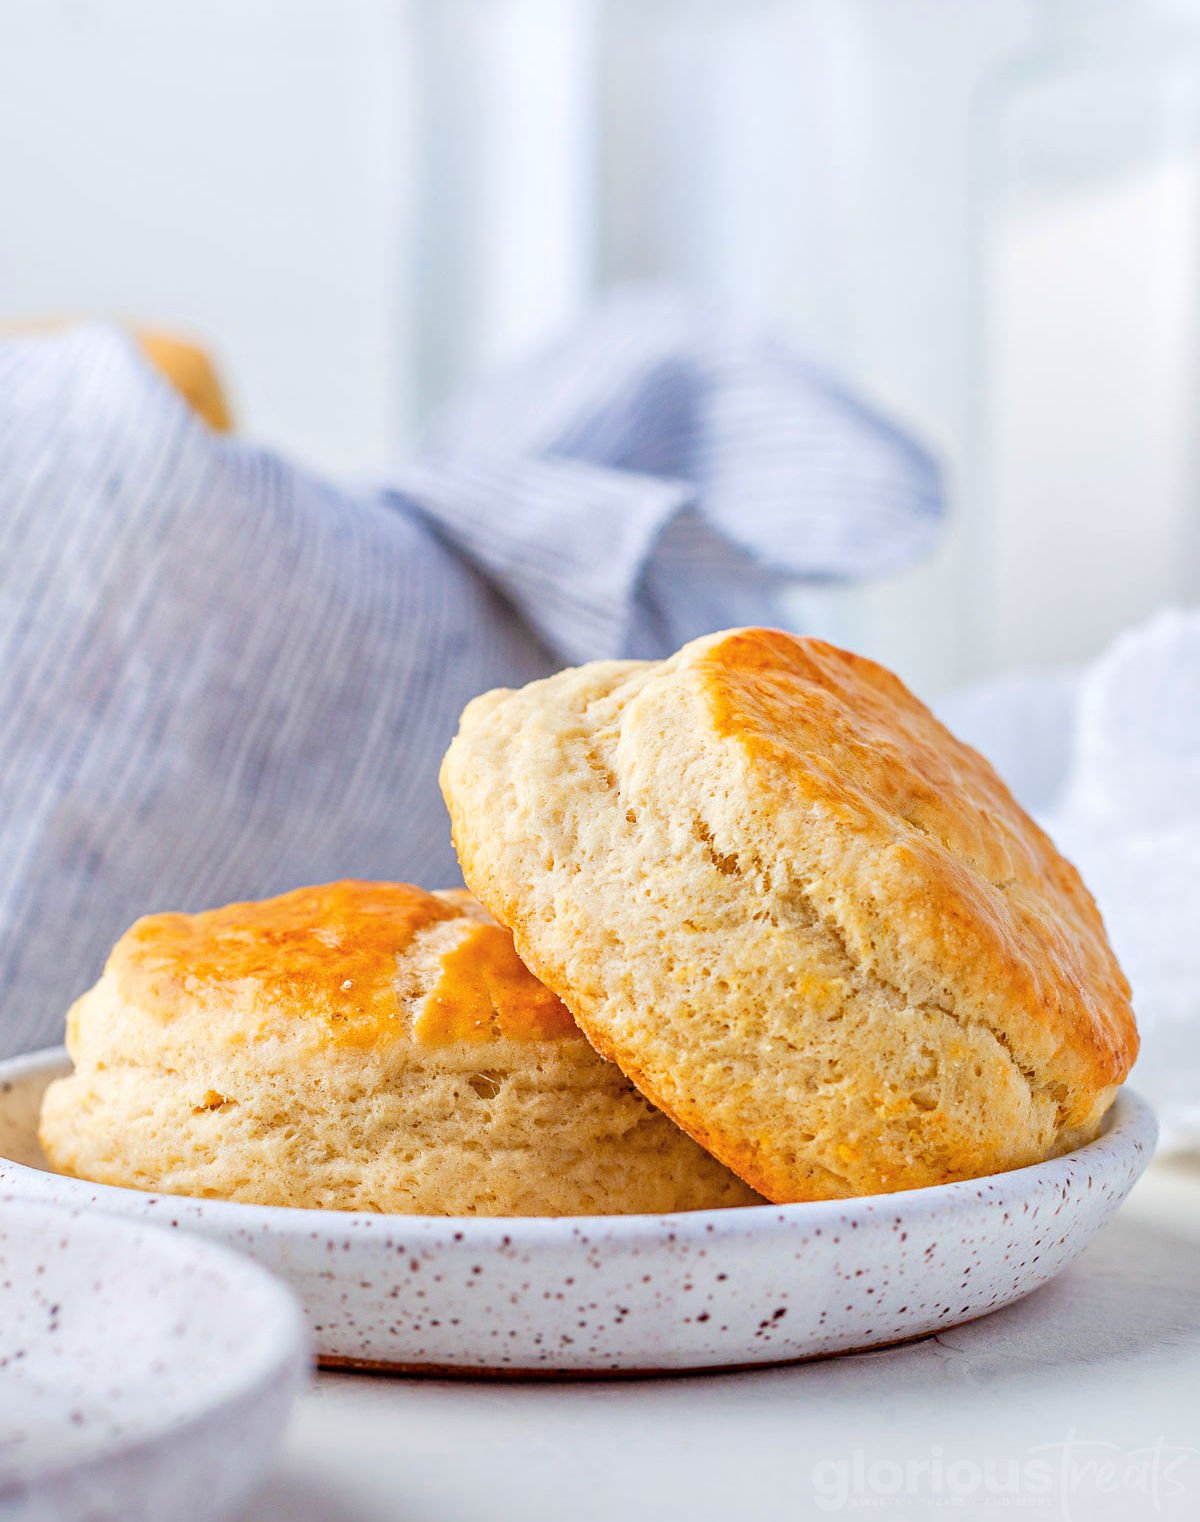 two biscuits on a small plate with one biscuit leaning up against the other. A basket is lined with a blue and white striped towel in the background.